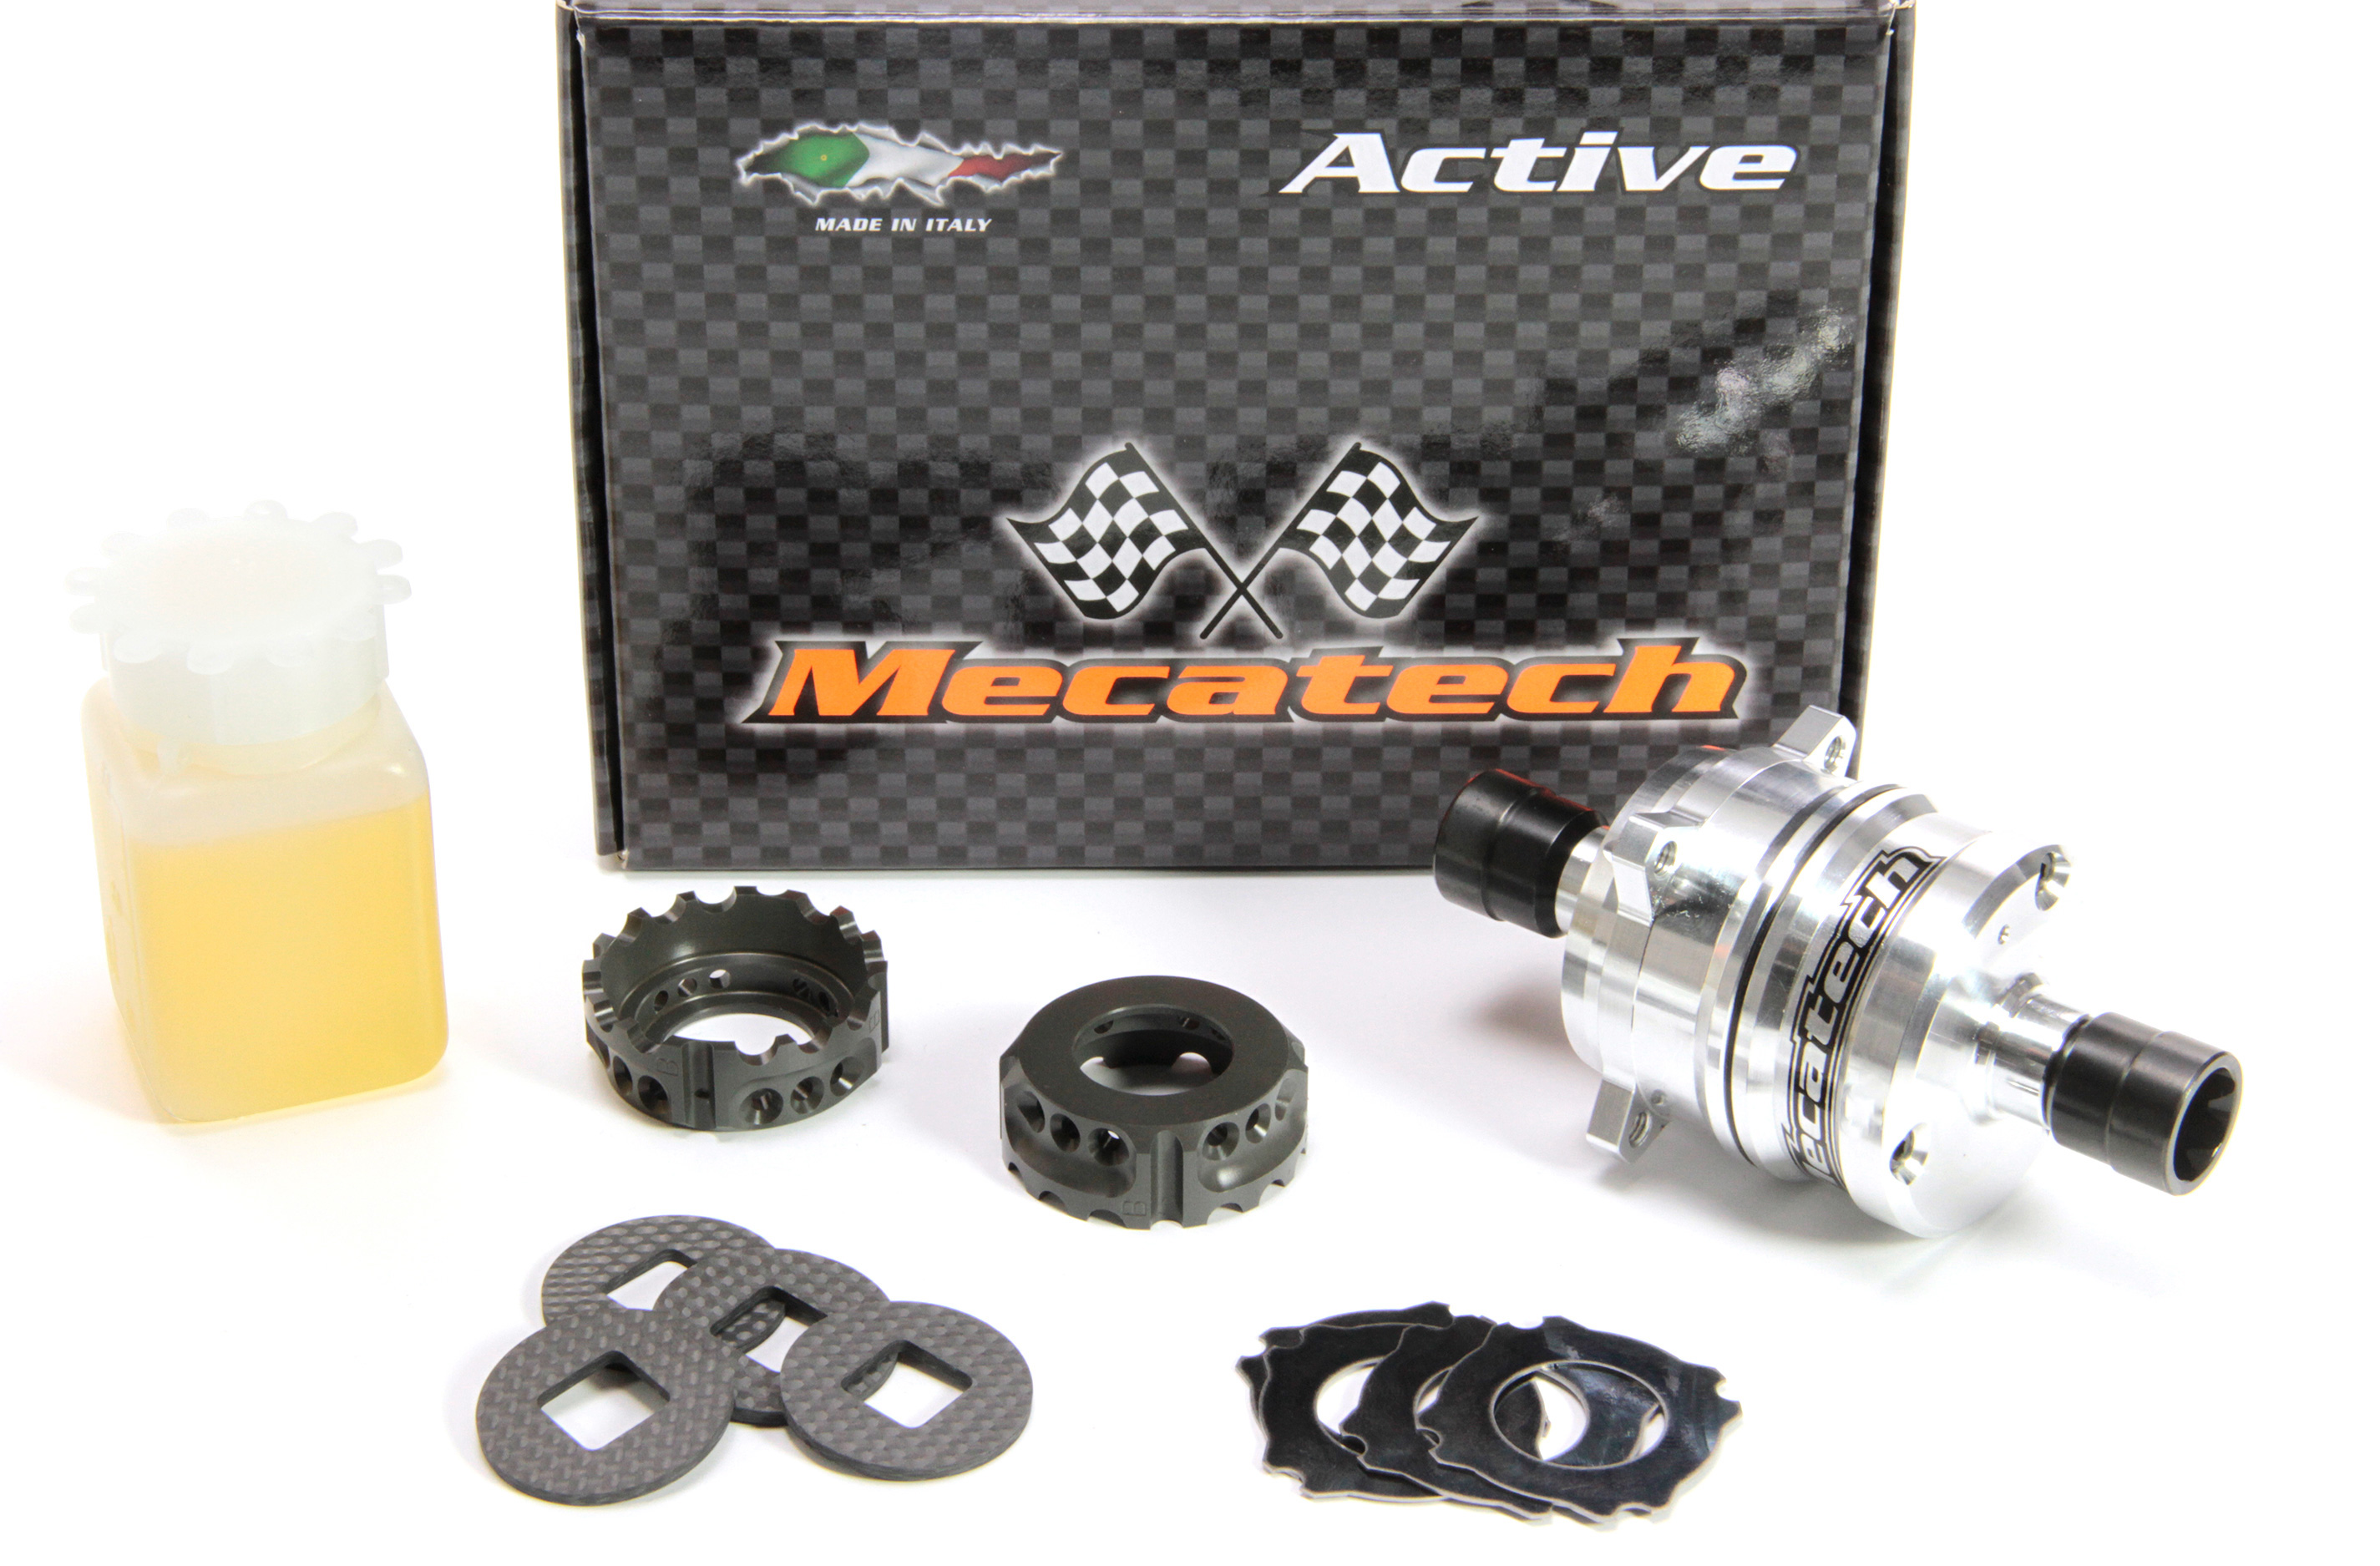 2015-Light Mecatech Active Differential for 1/5 scale cars